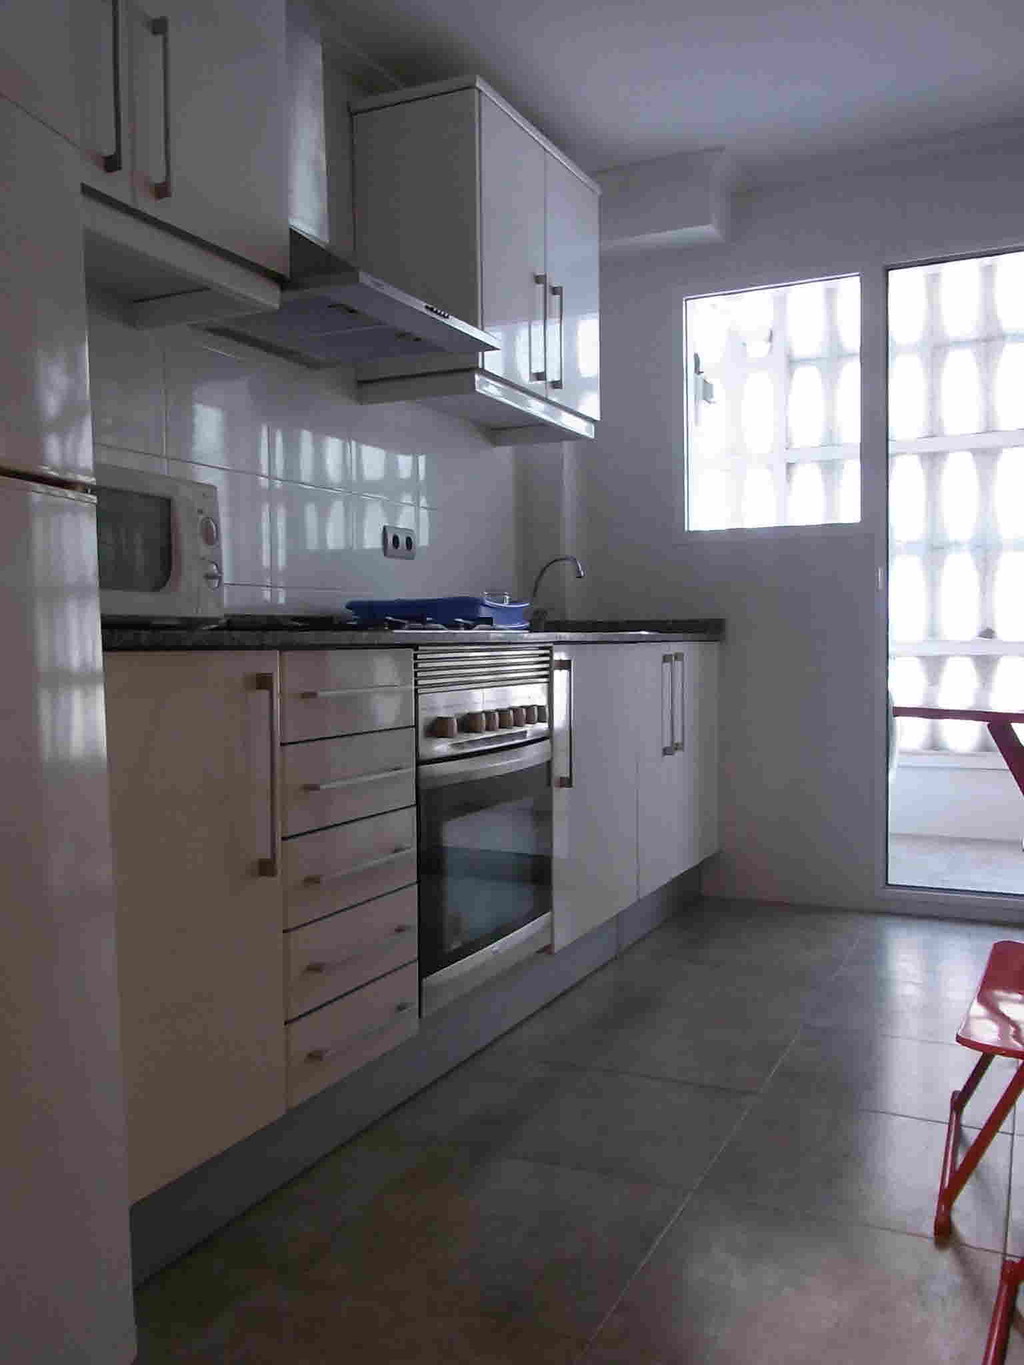 Two Rooms To Rent In A 4 Bedroom Flat University Area Of Valencia